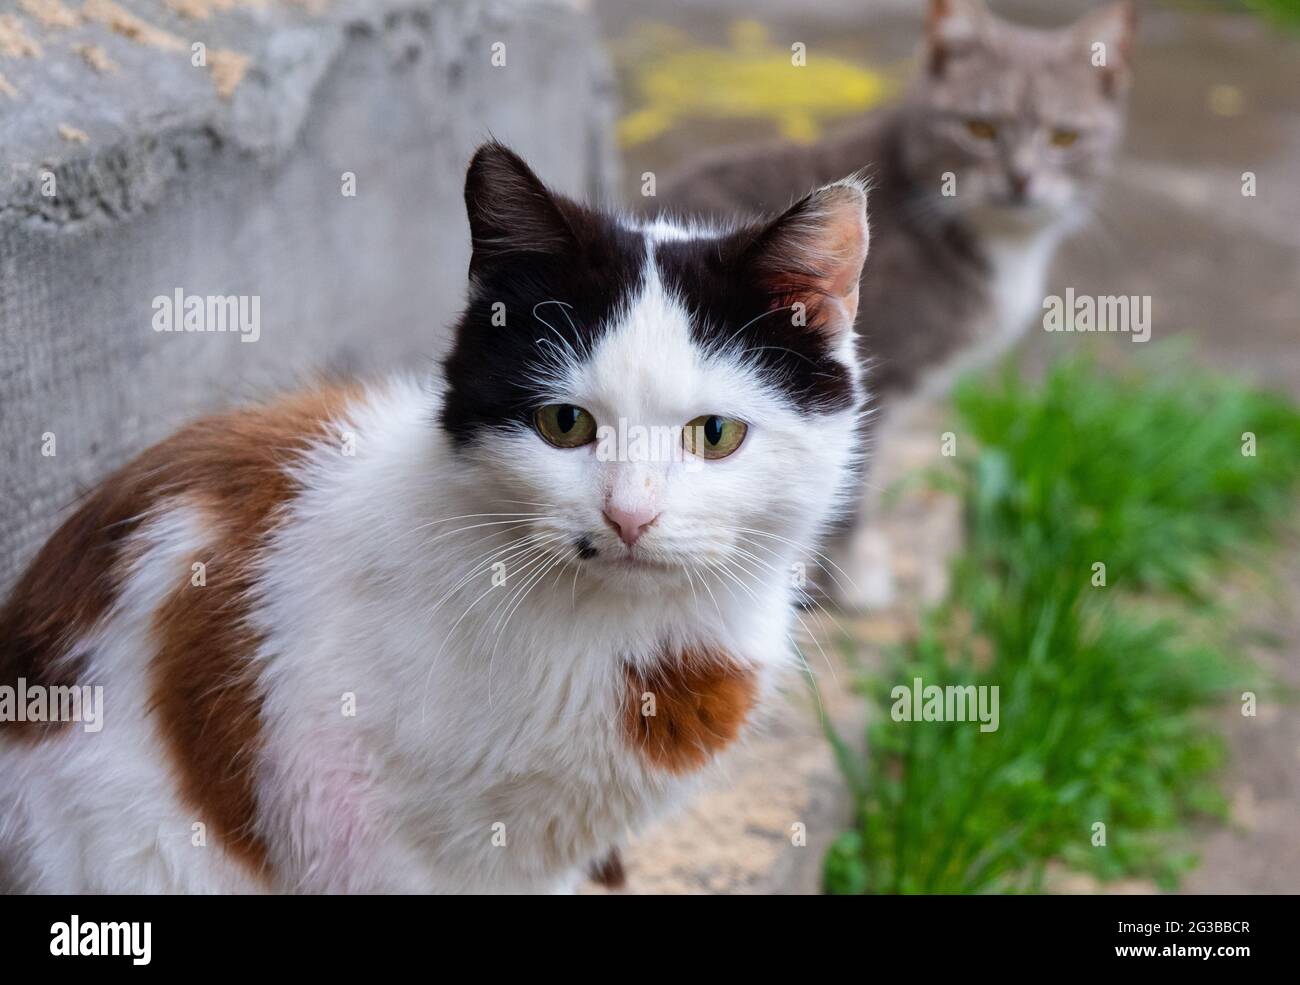 homeless street cats, animal protection concept. Stock Photo